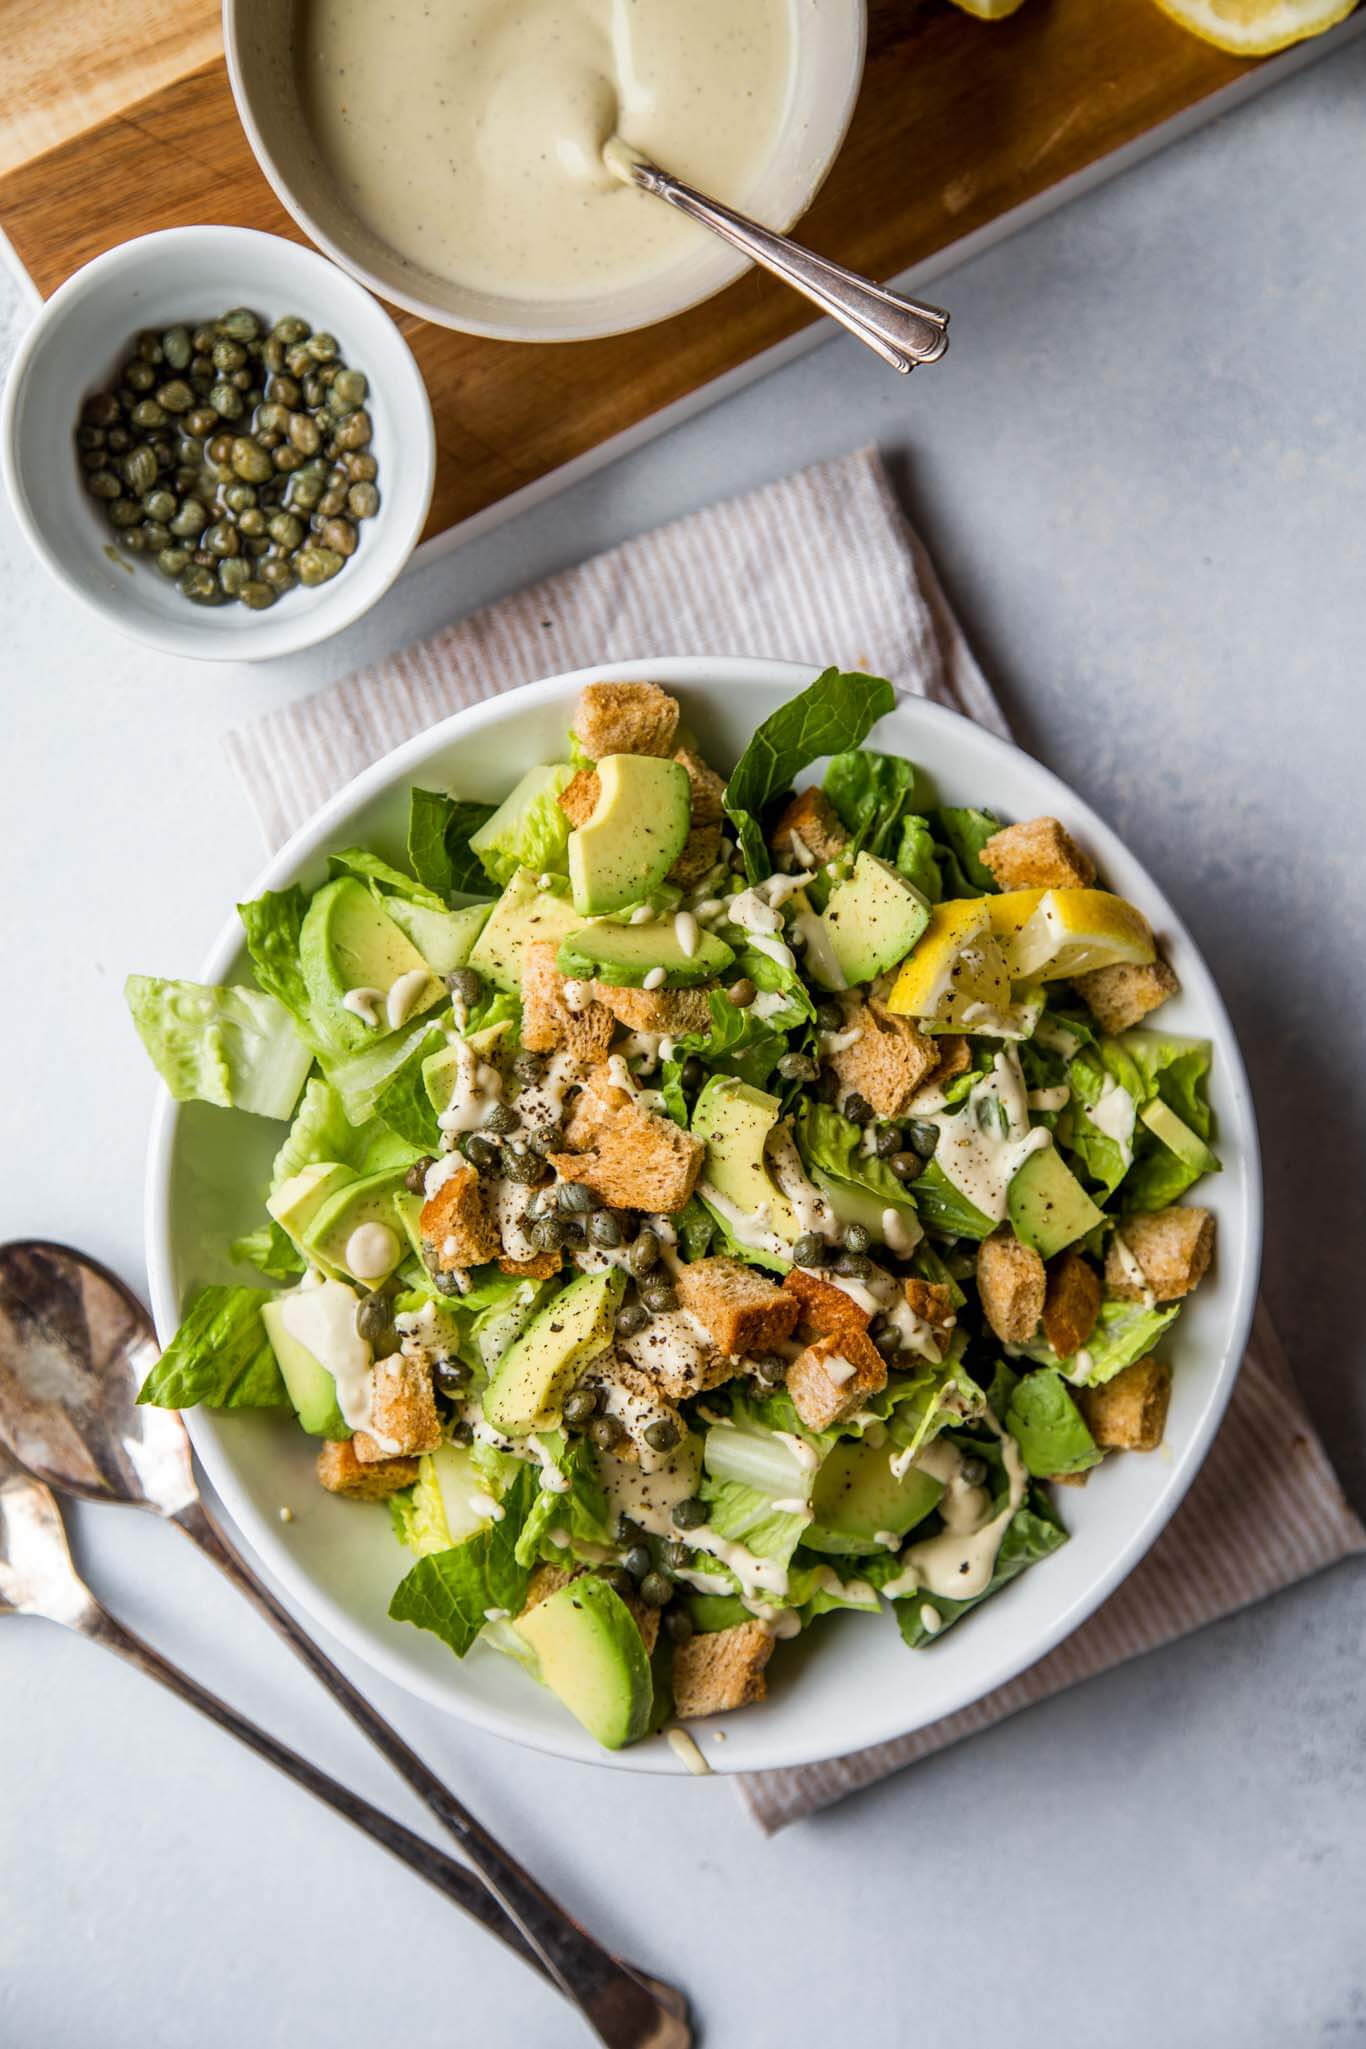 This Vegan Caesar Salad has all the tanginess and creaminess that you'd expect from a traditional Caesar salad, but it's completely plant based. Topped with fresh avocado, capers and croutons.